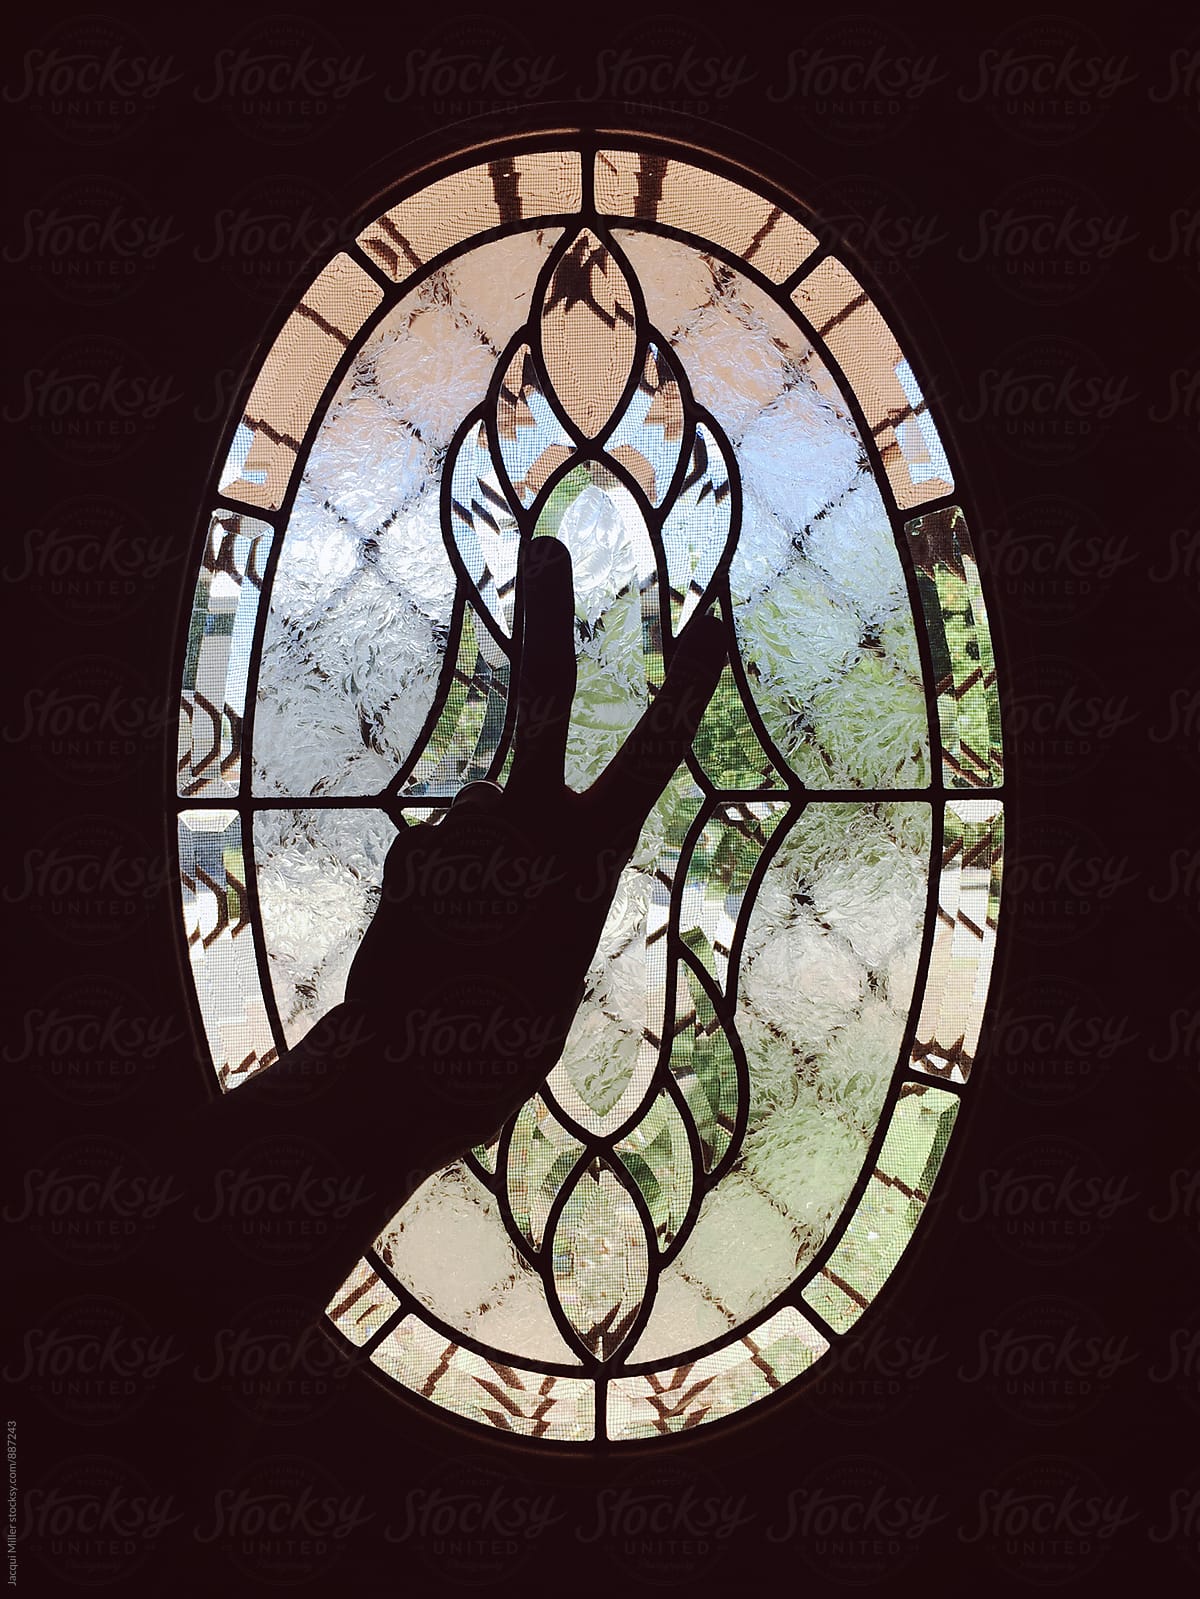 Silhouette of hand showing peace sign in front of oval window